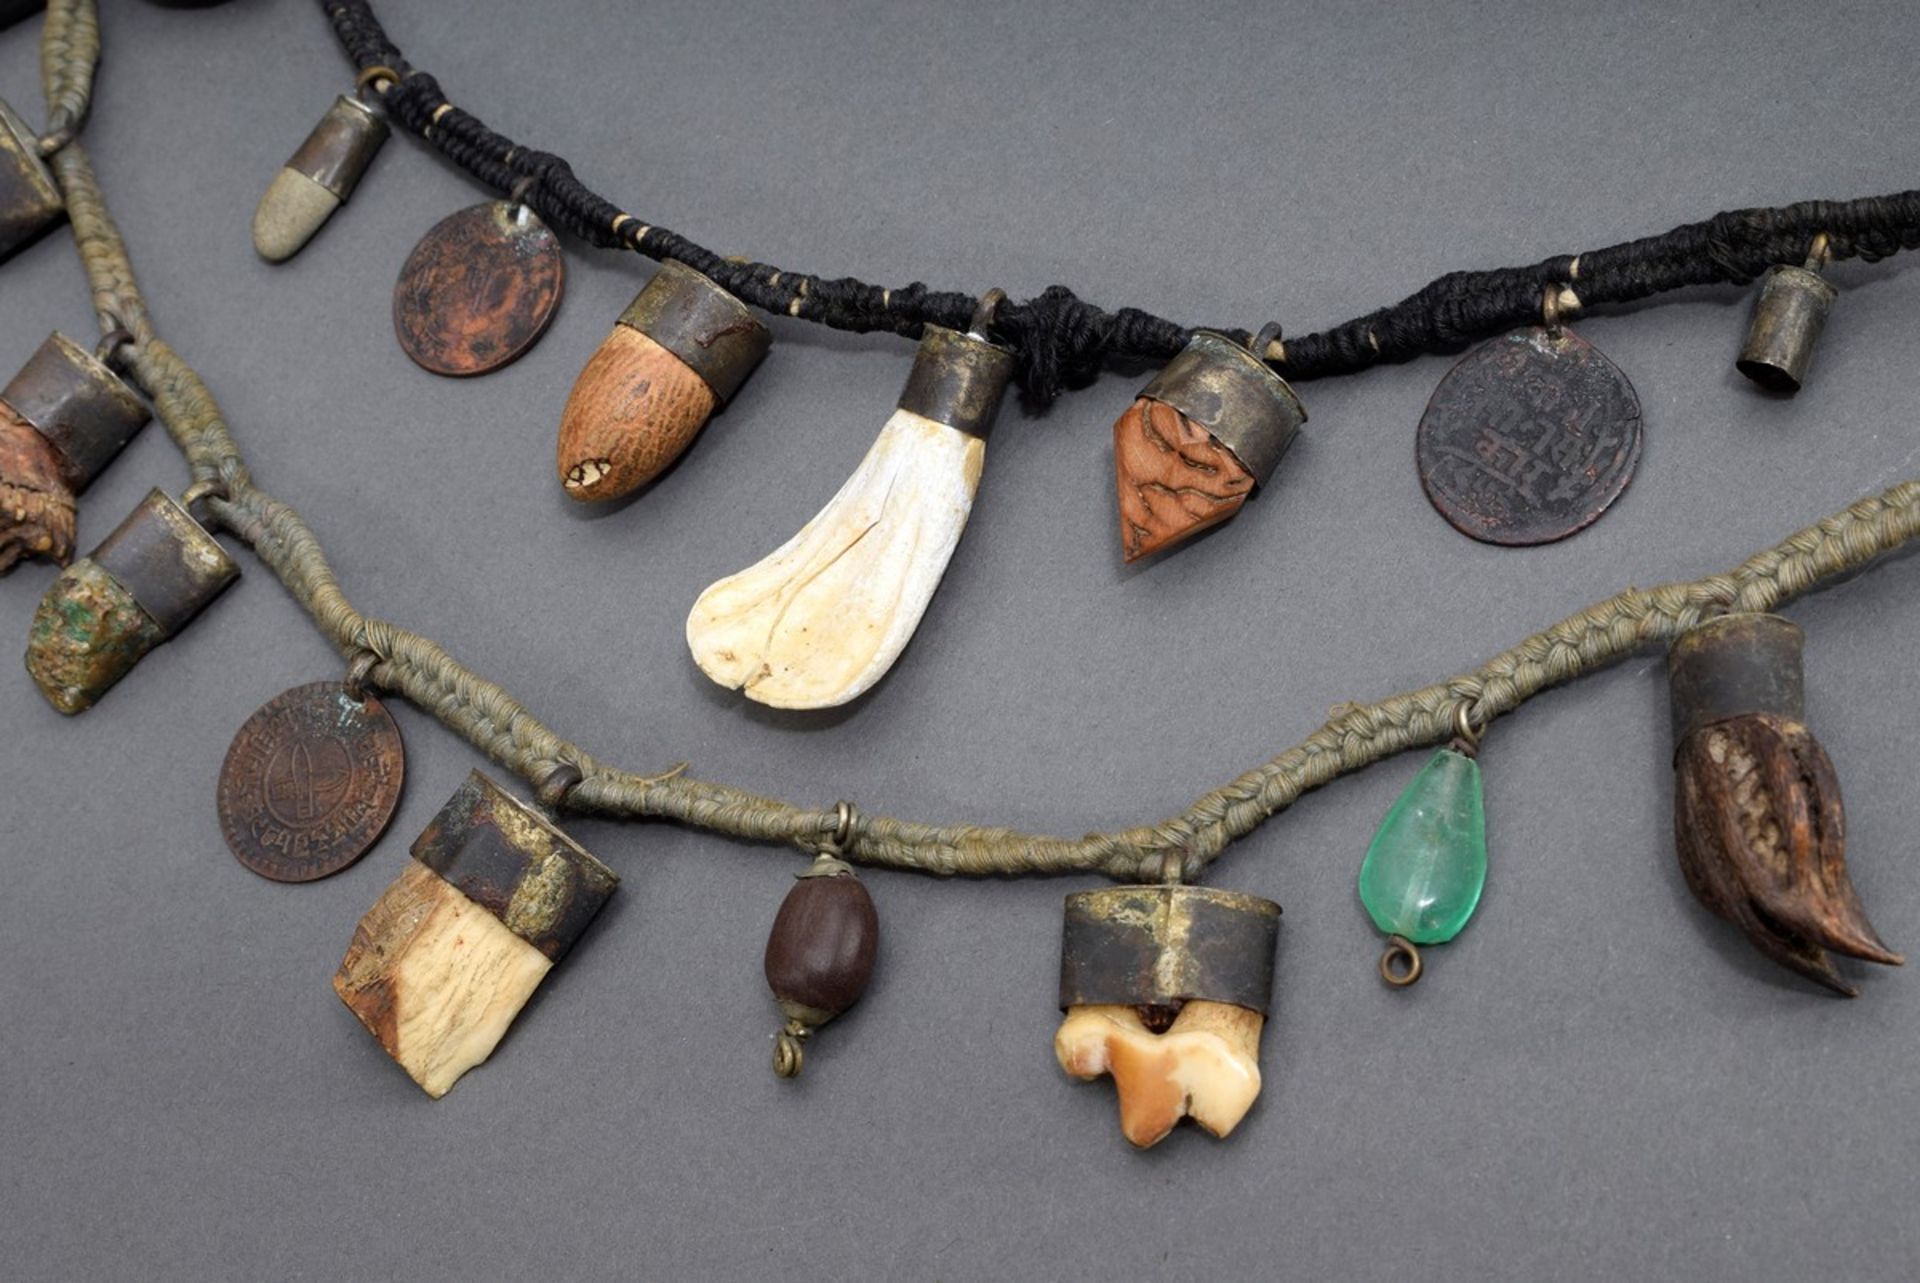 2 various Fraisen chains with different individual amulets made of bones, kernels, shells, minerals